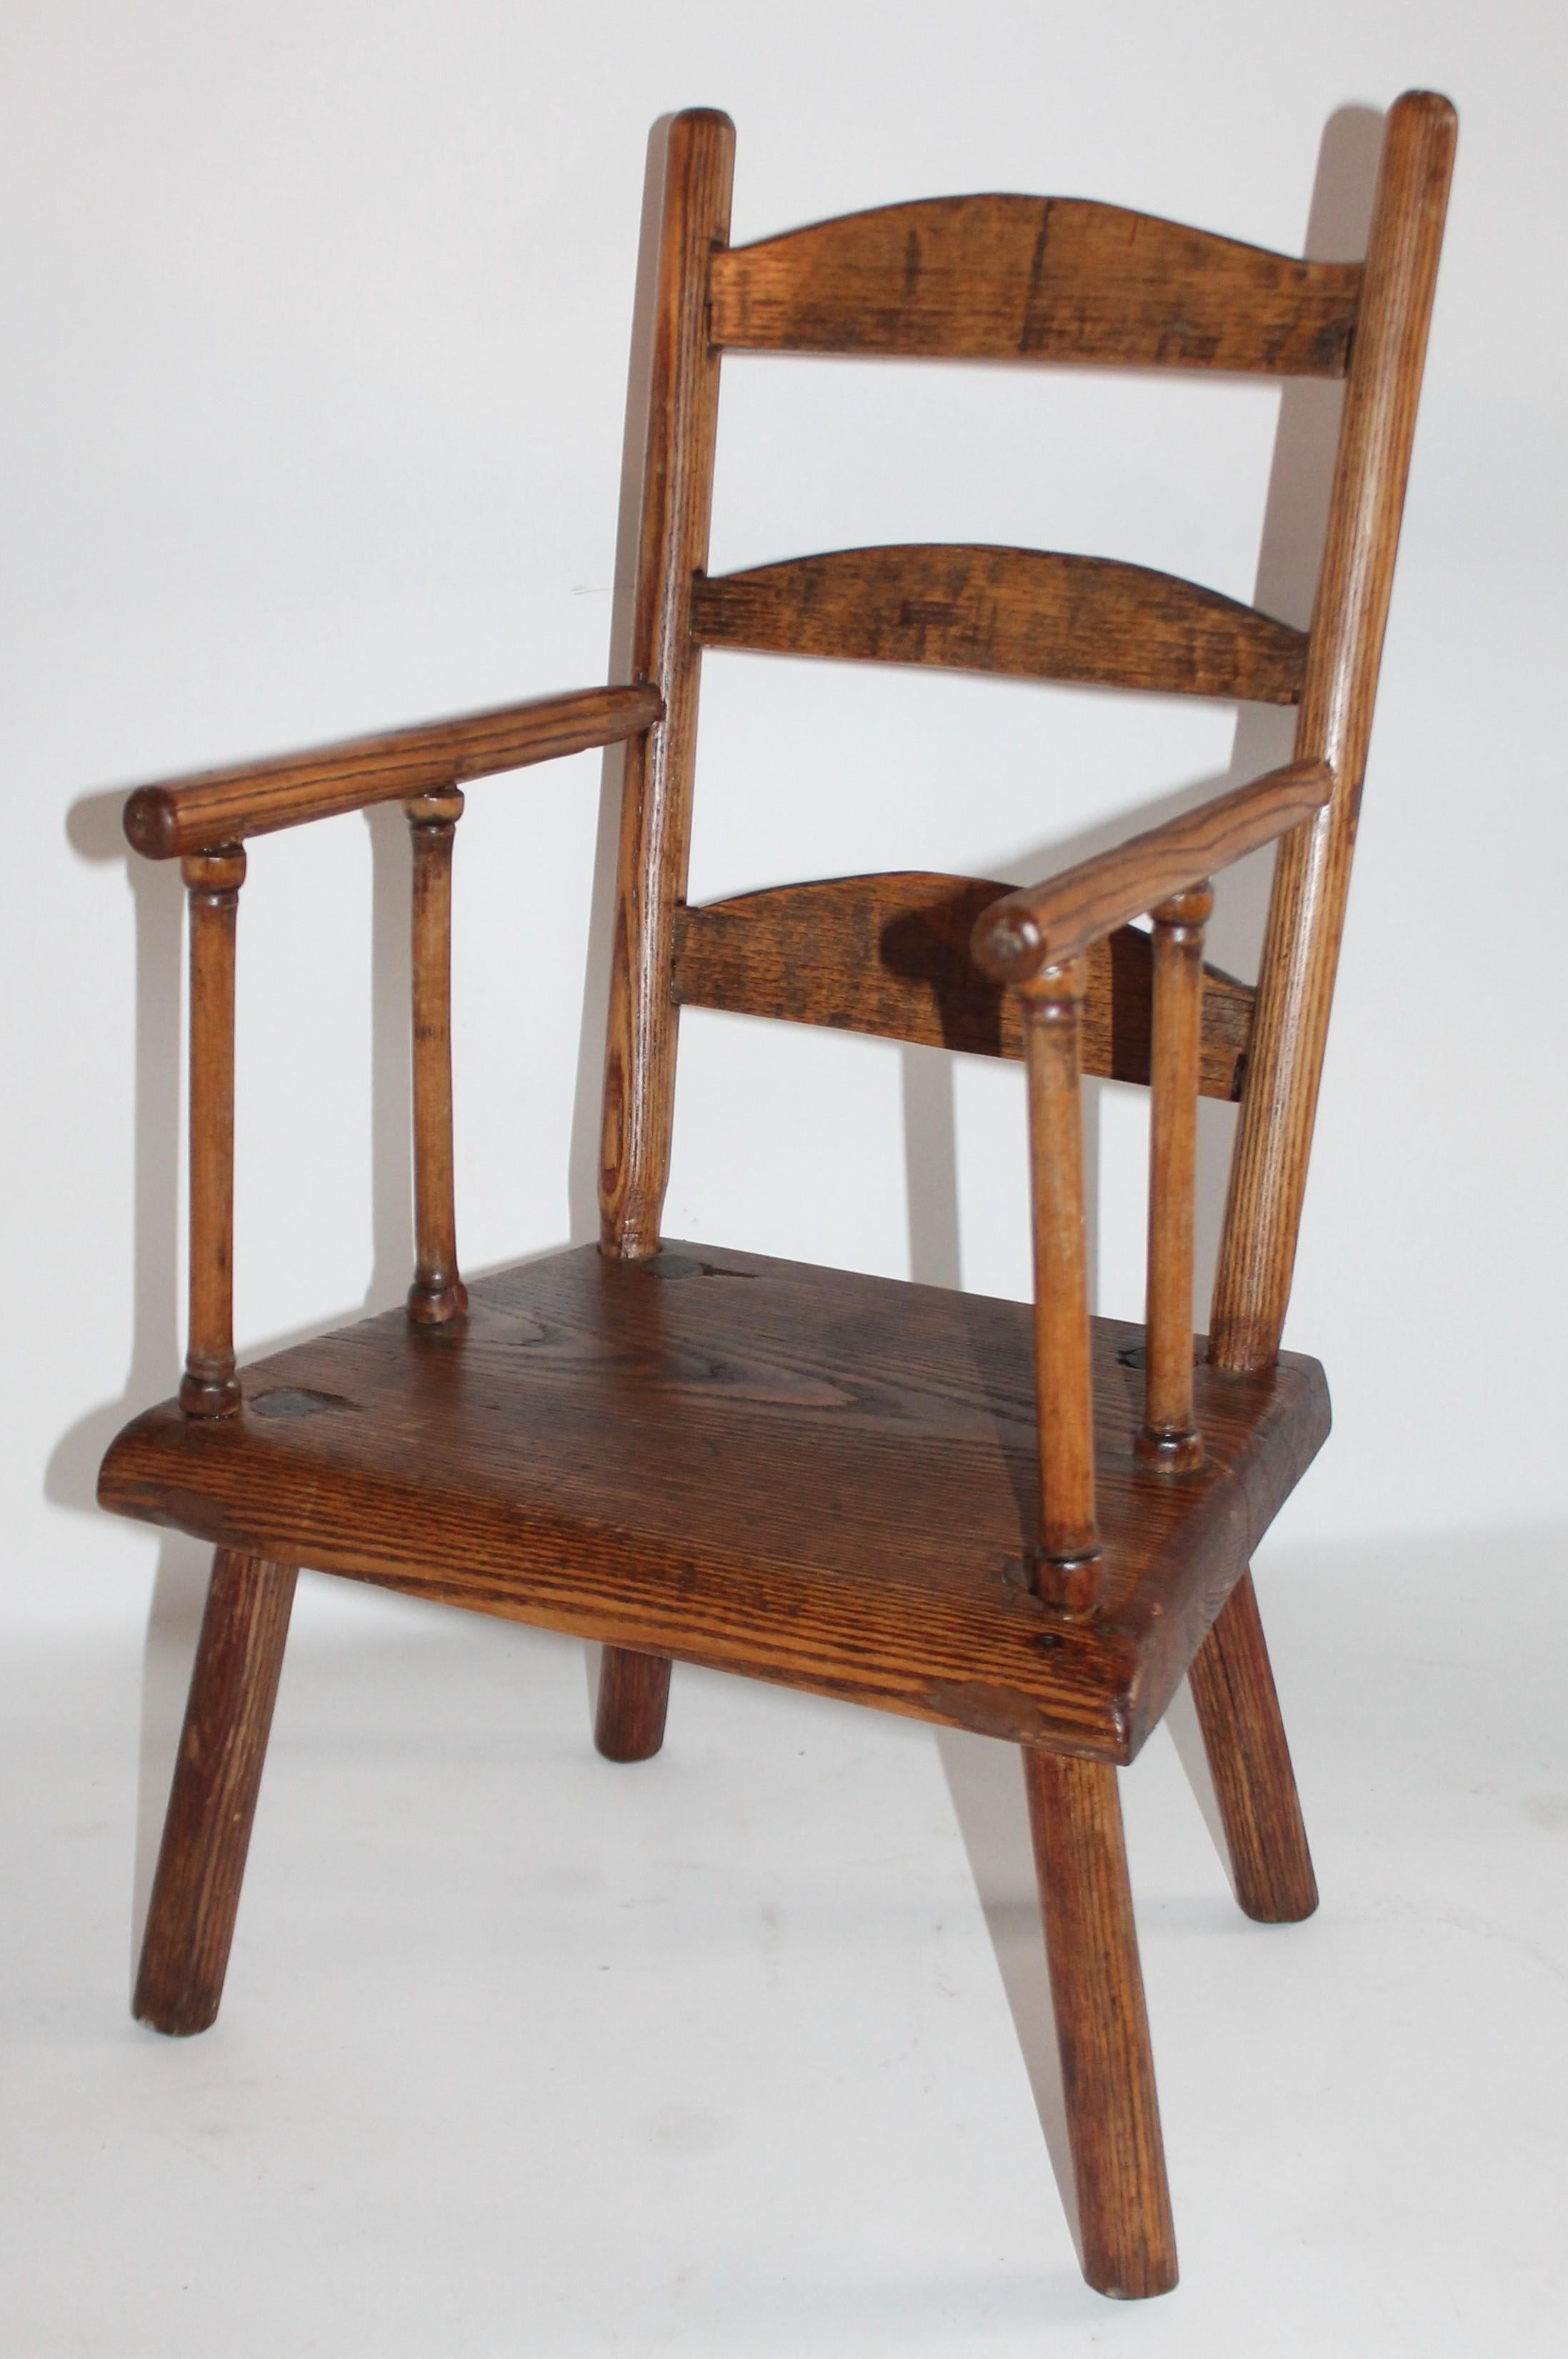 Early 19th century ladder back child's chair from New England in fantastic condition. This early chair is mortised and square nail construction.